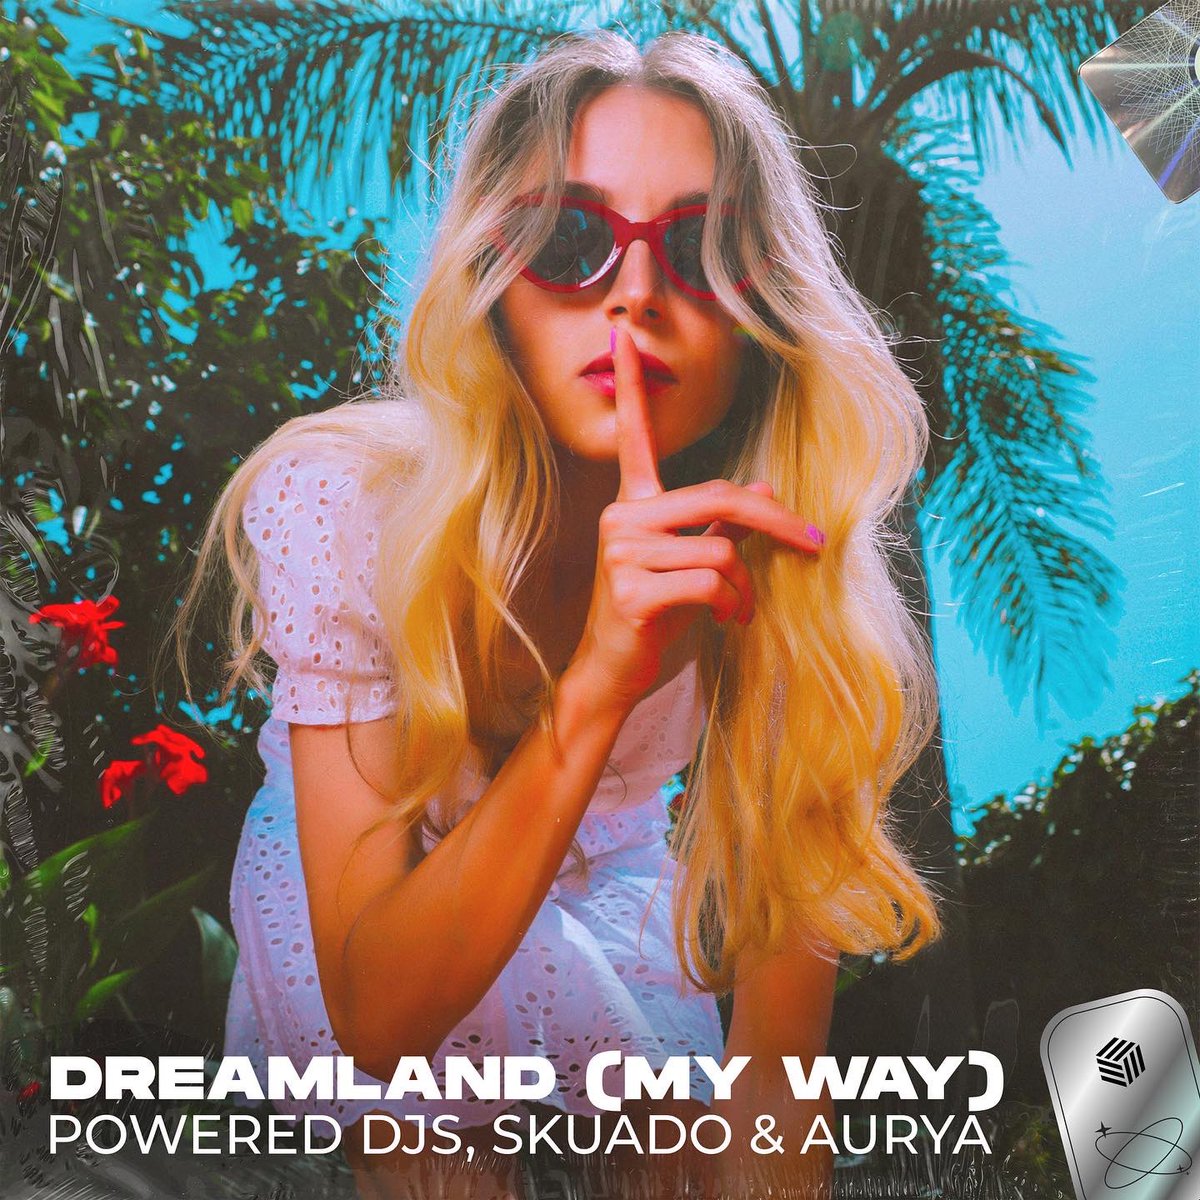 My new collabs with @powereddjs and @skuado is OUT NOW on @futurehousecloud 🎶 Check it out 🔥 #dreamland #newmusic #slaphouse #housemusic #edm #newmusicfriday #futurehouse #carmusic